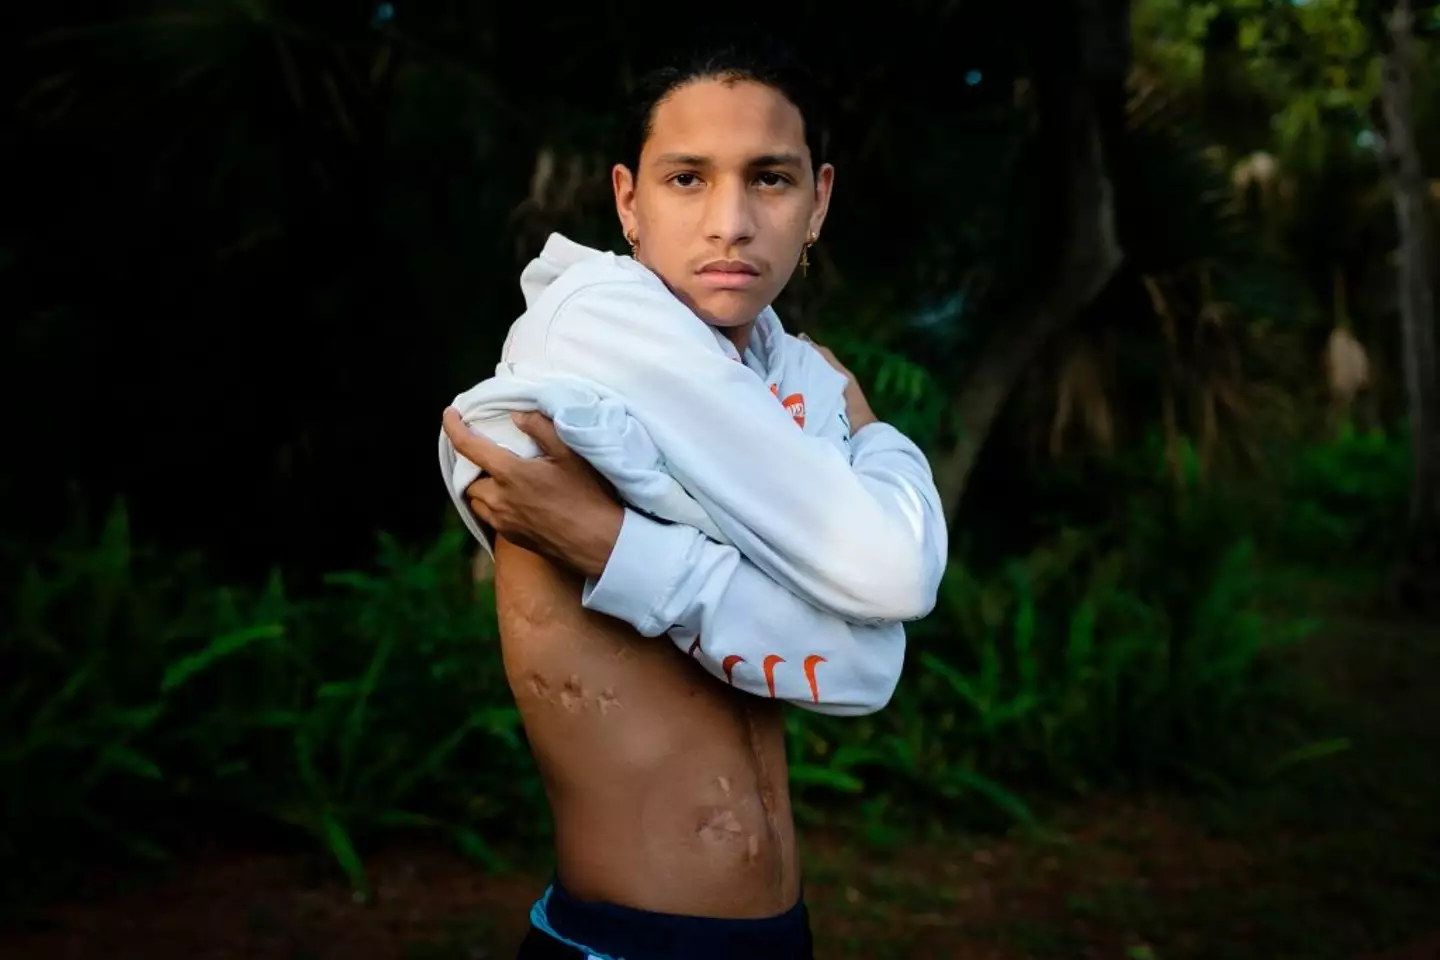 Anthony Borges shows his injuries a year on from the massacre. (EVA MARIE UZCATEGUI/AFP via Getty Images)